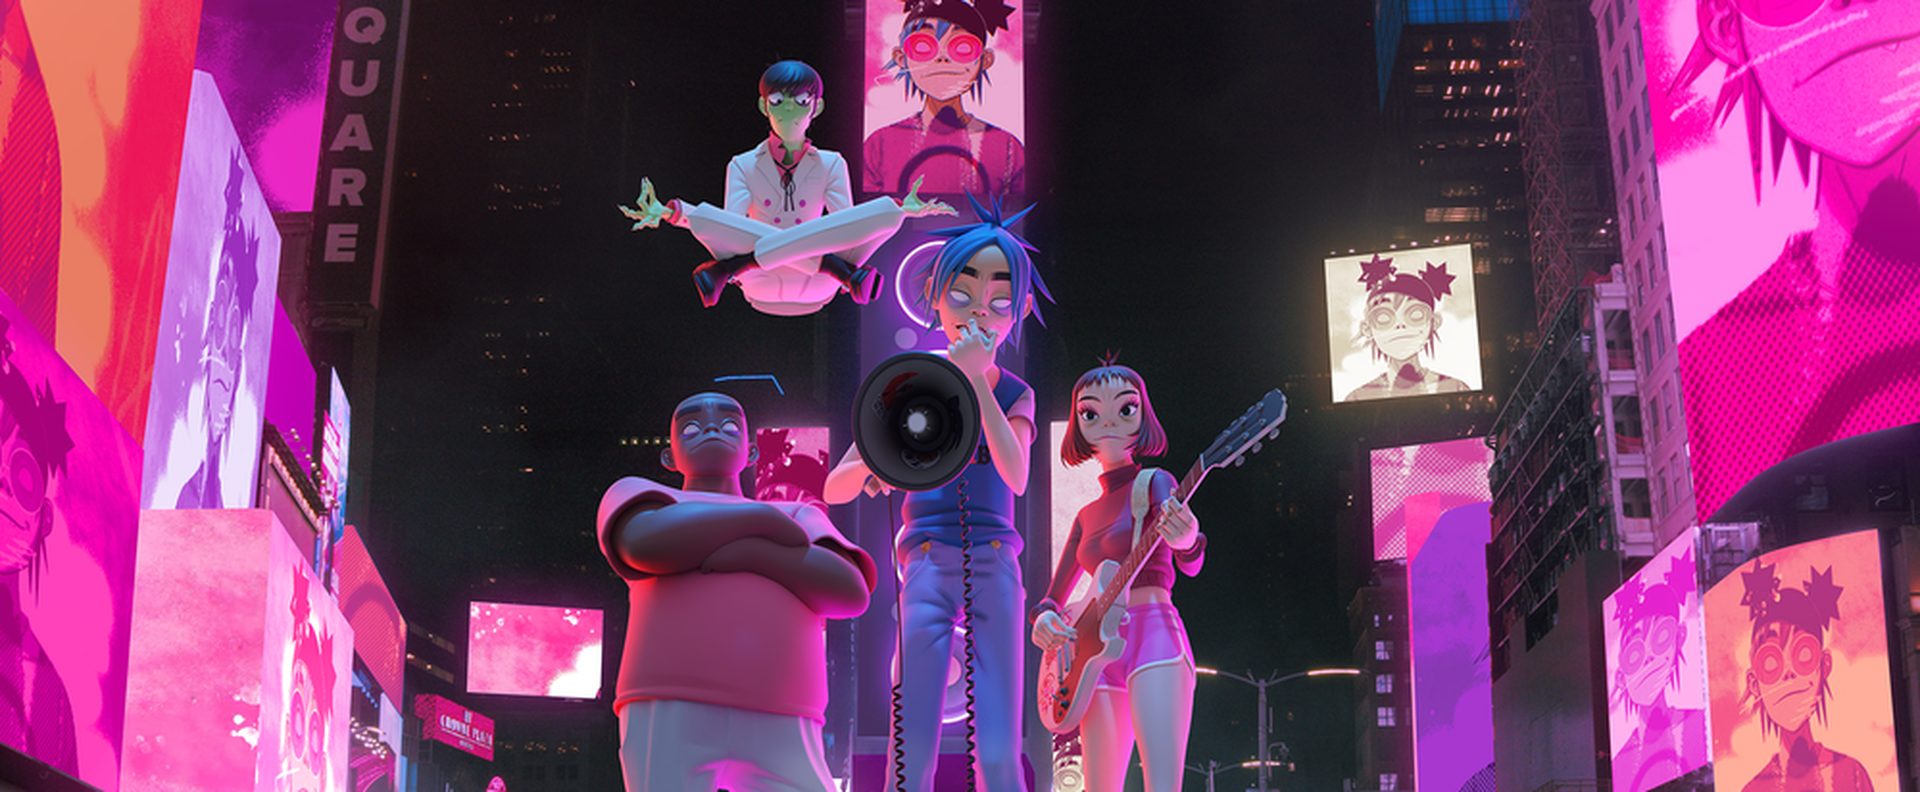 Gorillaz augmented reality concerts powered by Google